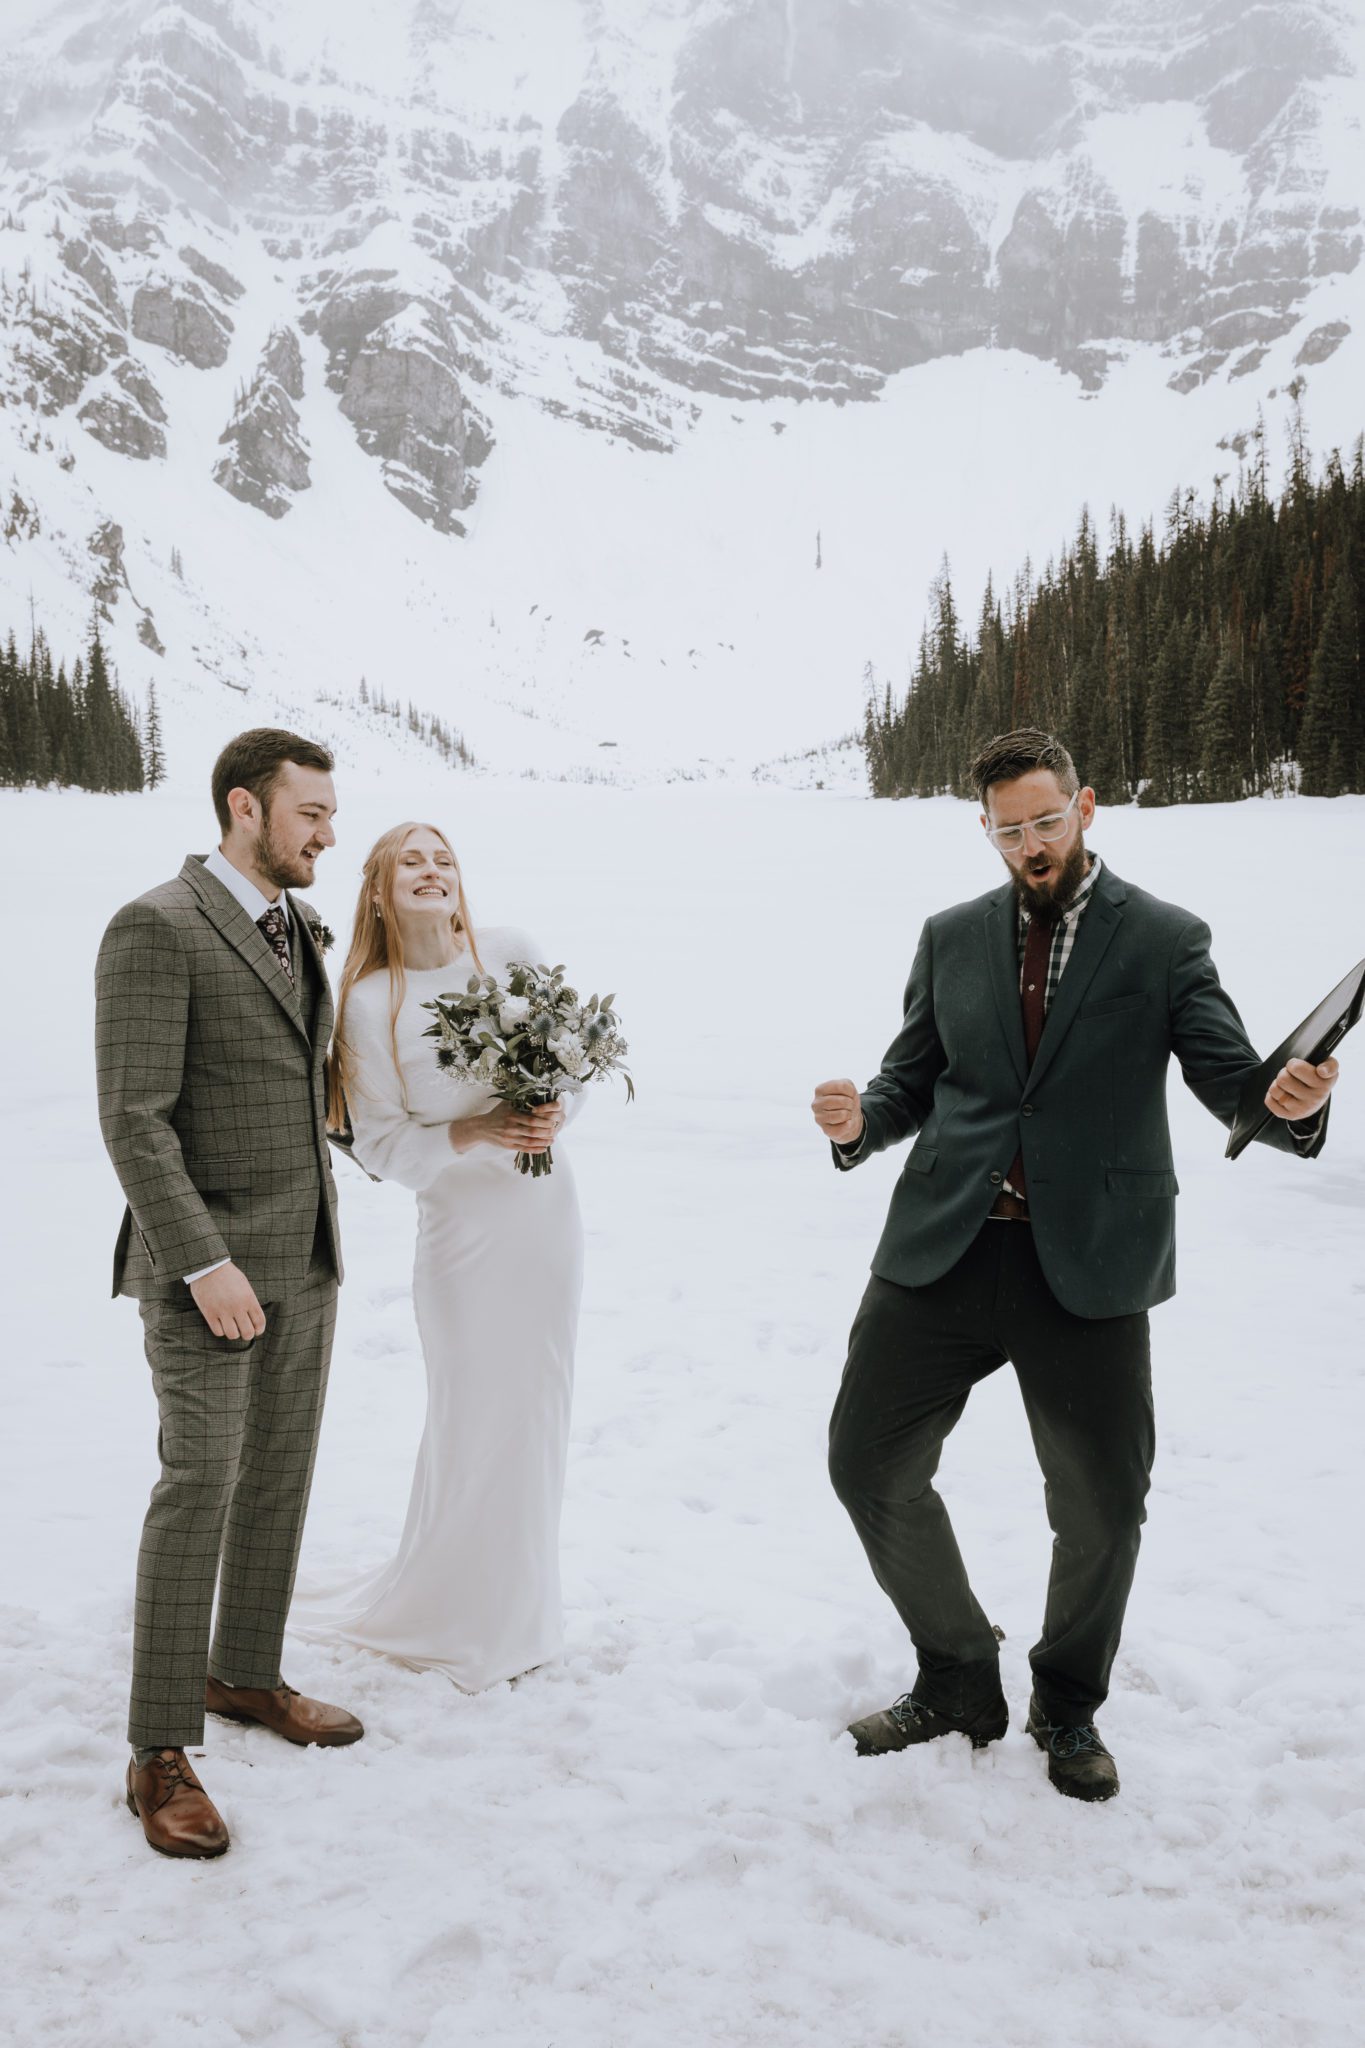 This Nordegg Helicopter Elopement in the Mountains Makes Our Hearts Soar